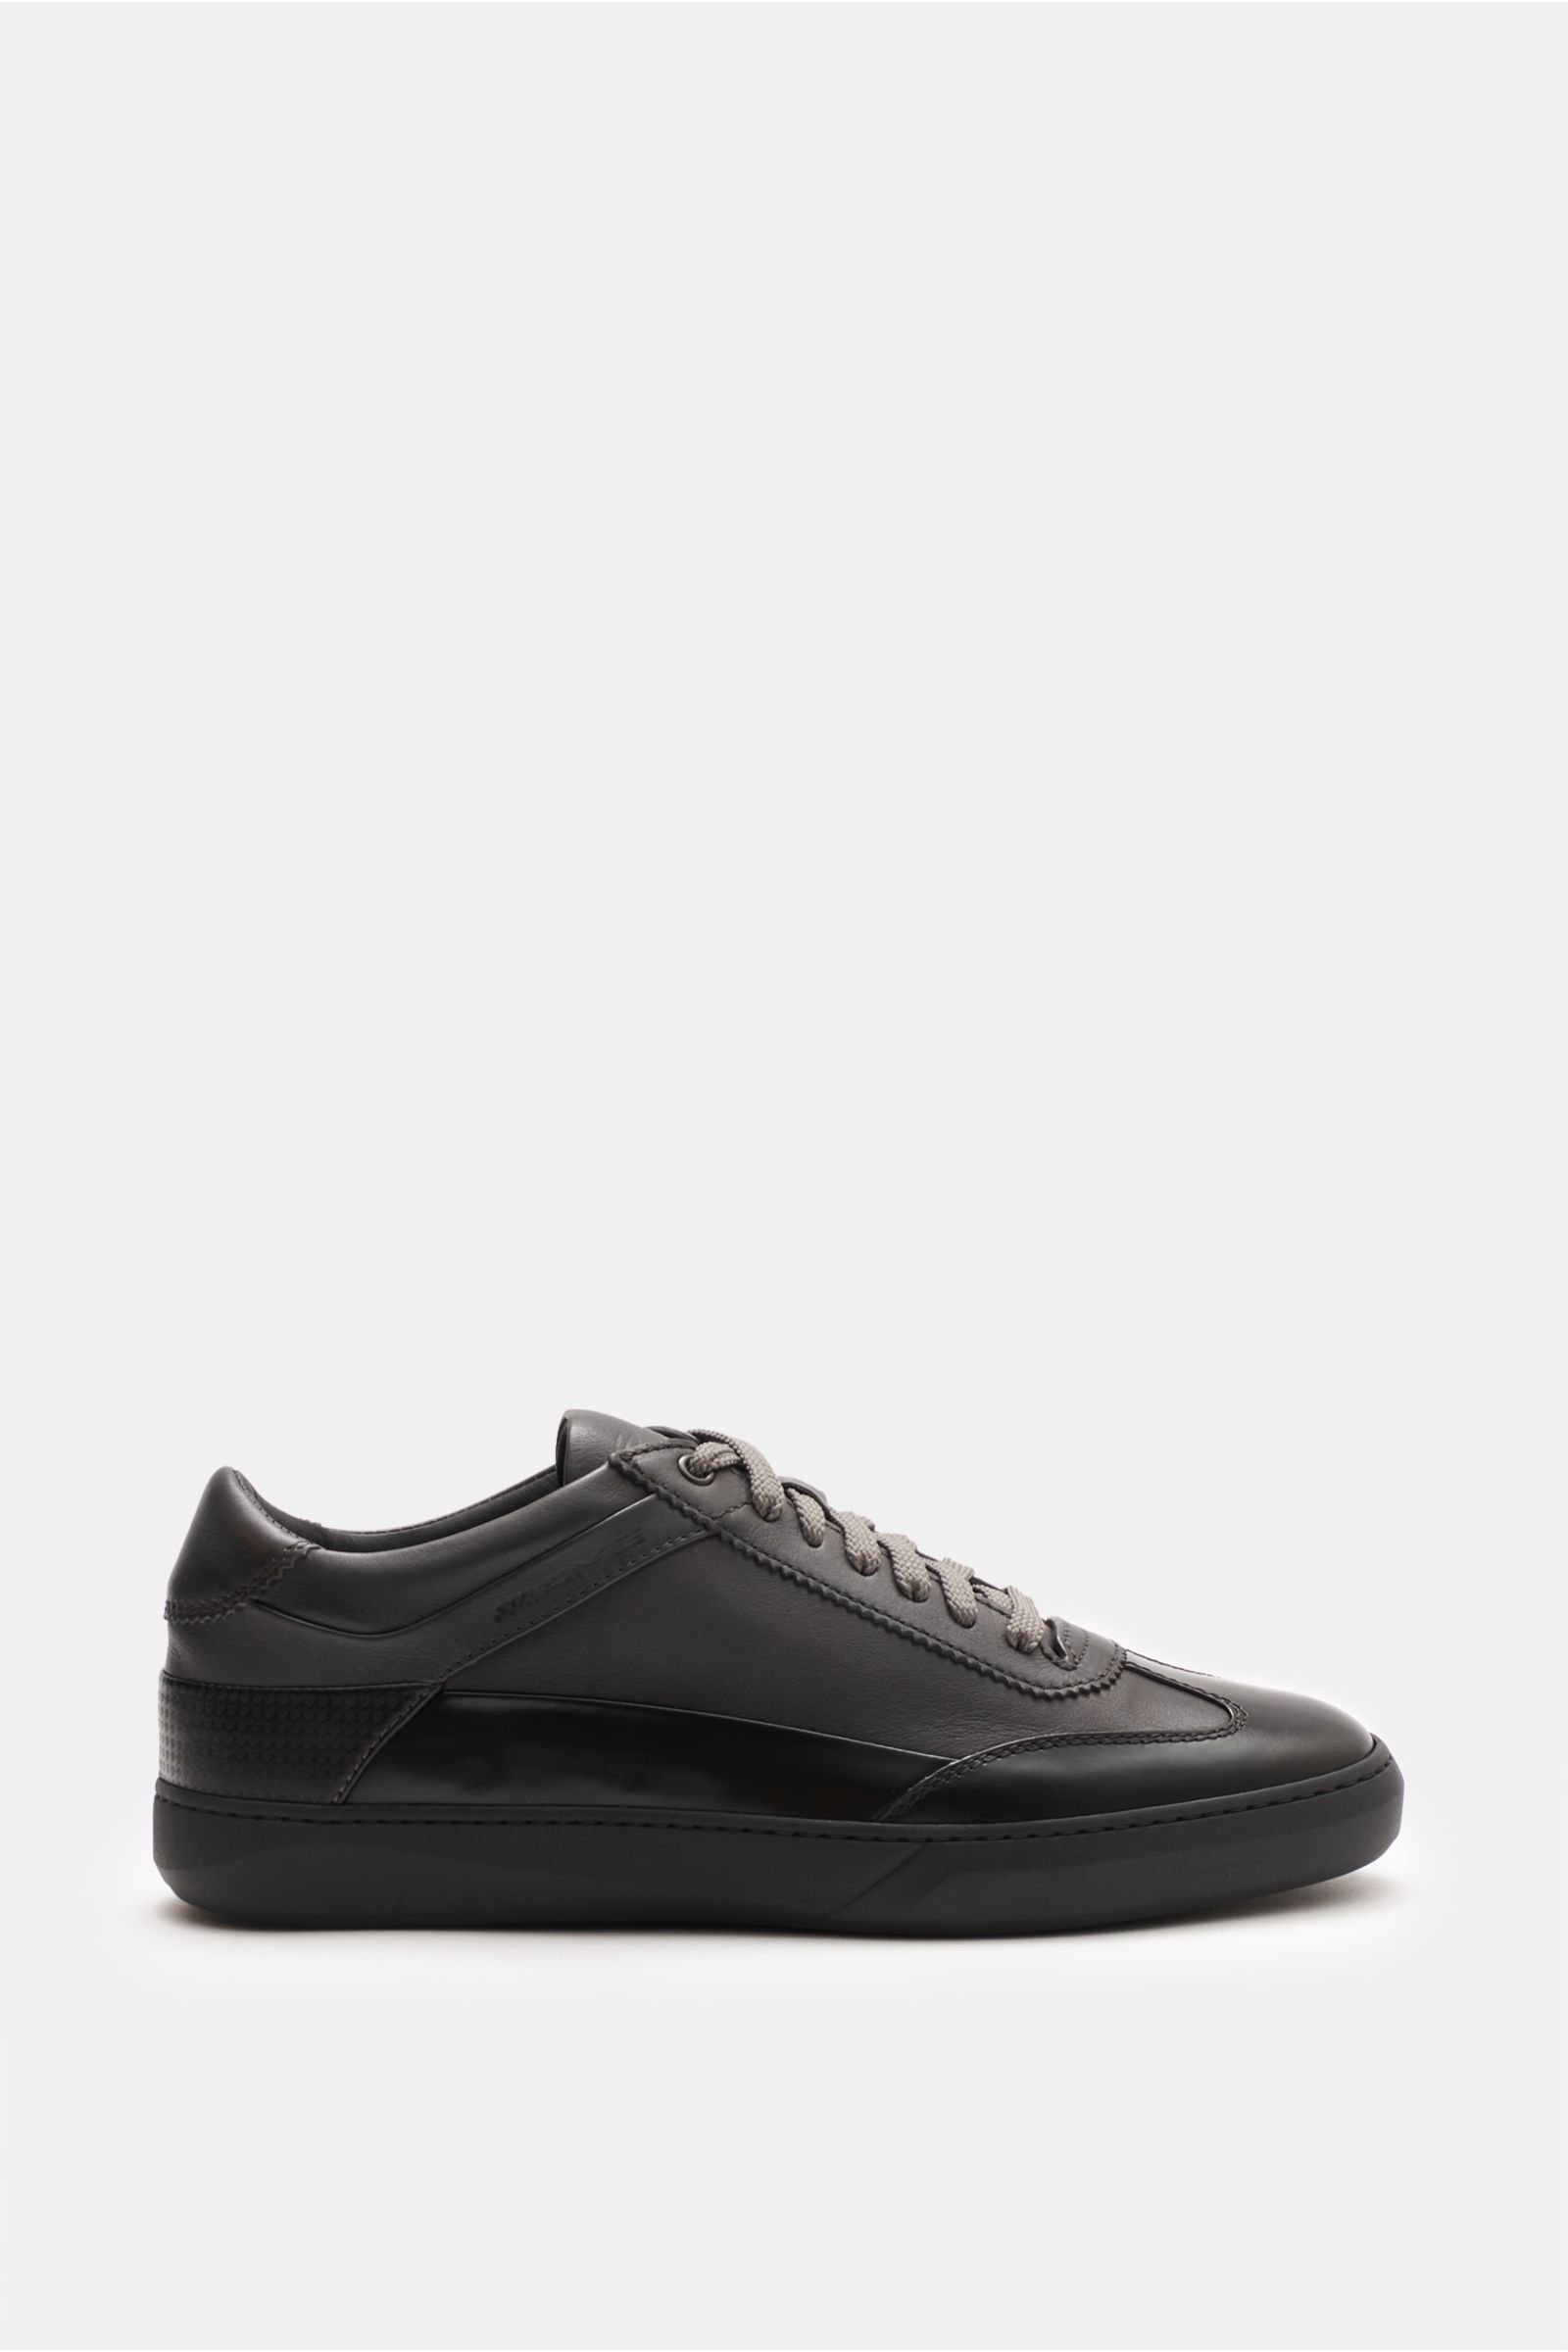 Sneakers black/anthracite